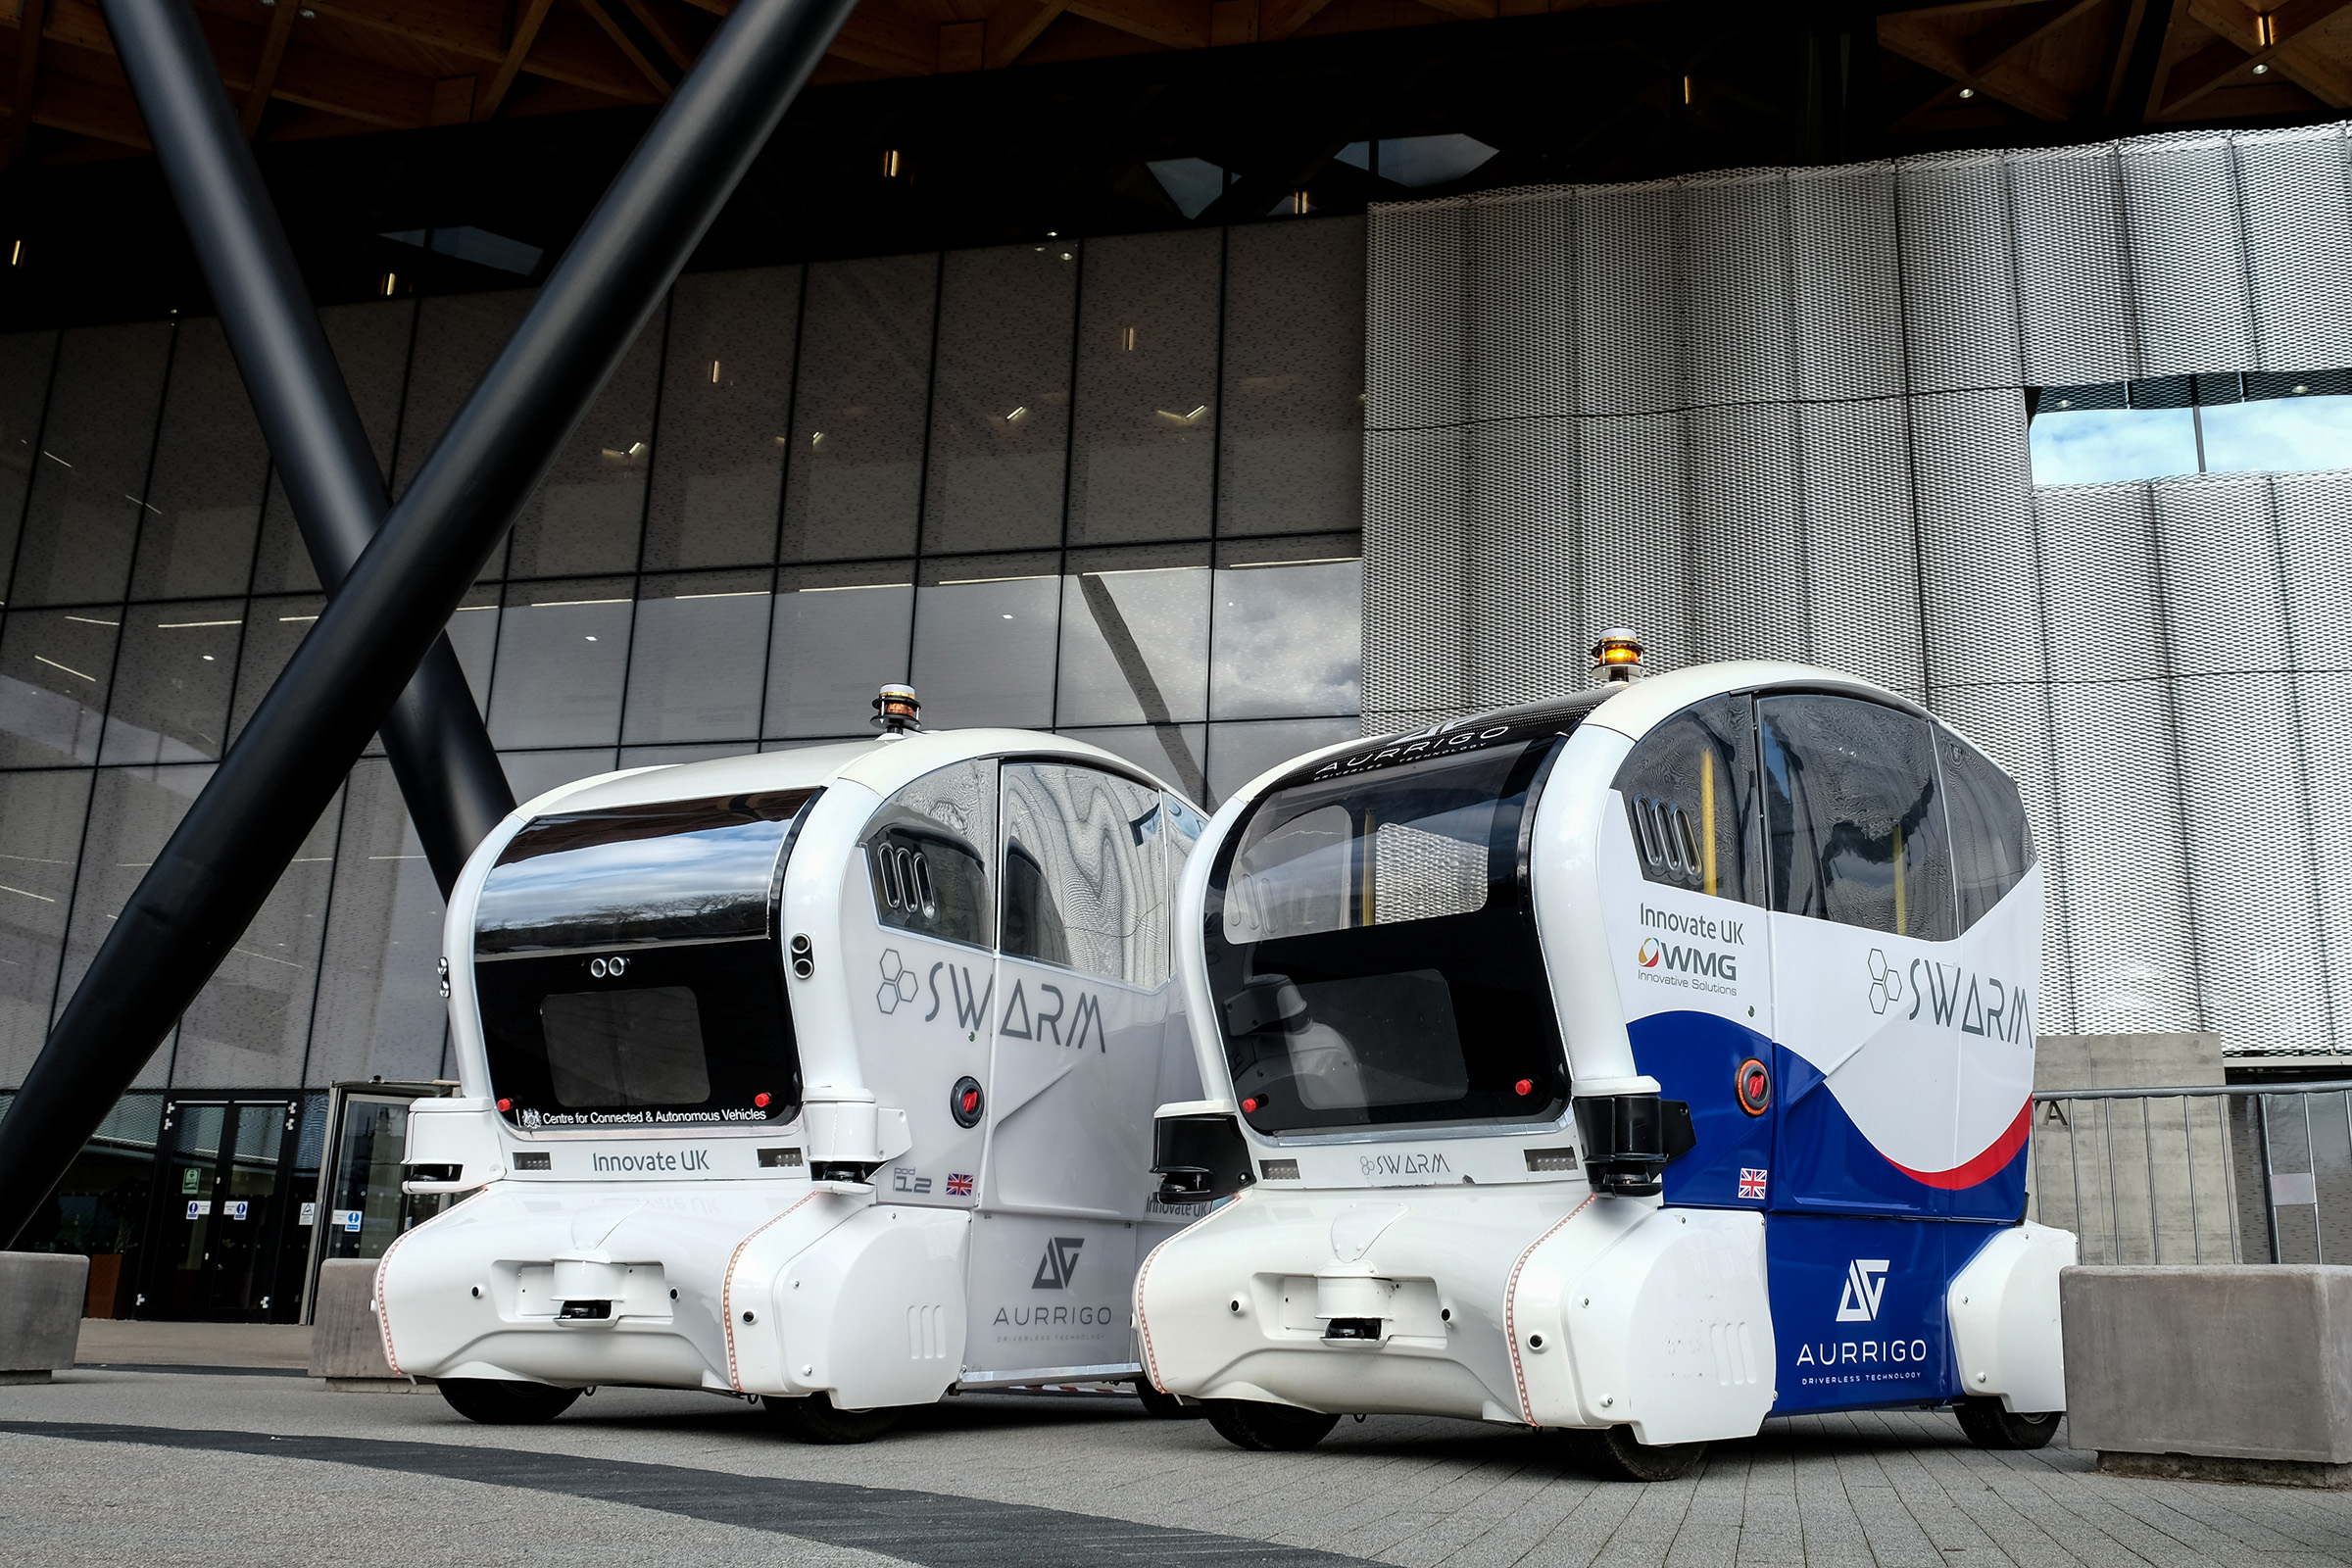 Newswise: Autonomous pods SWARM together like bees in world first demonstration